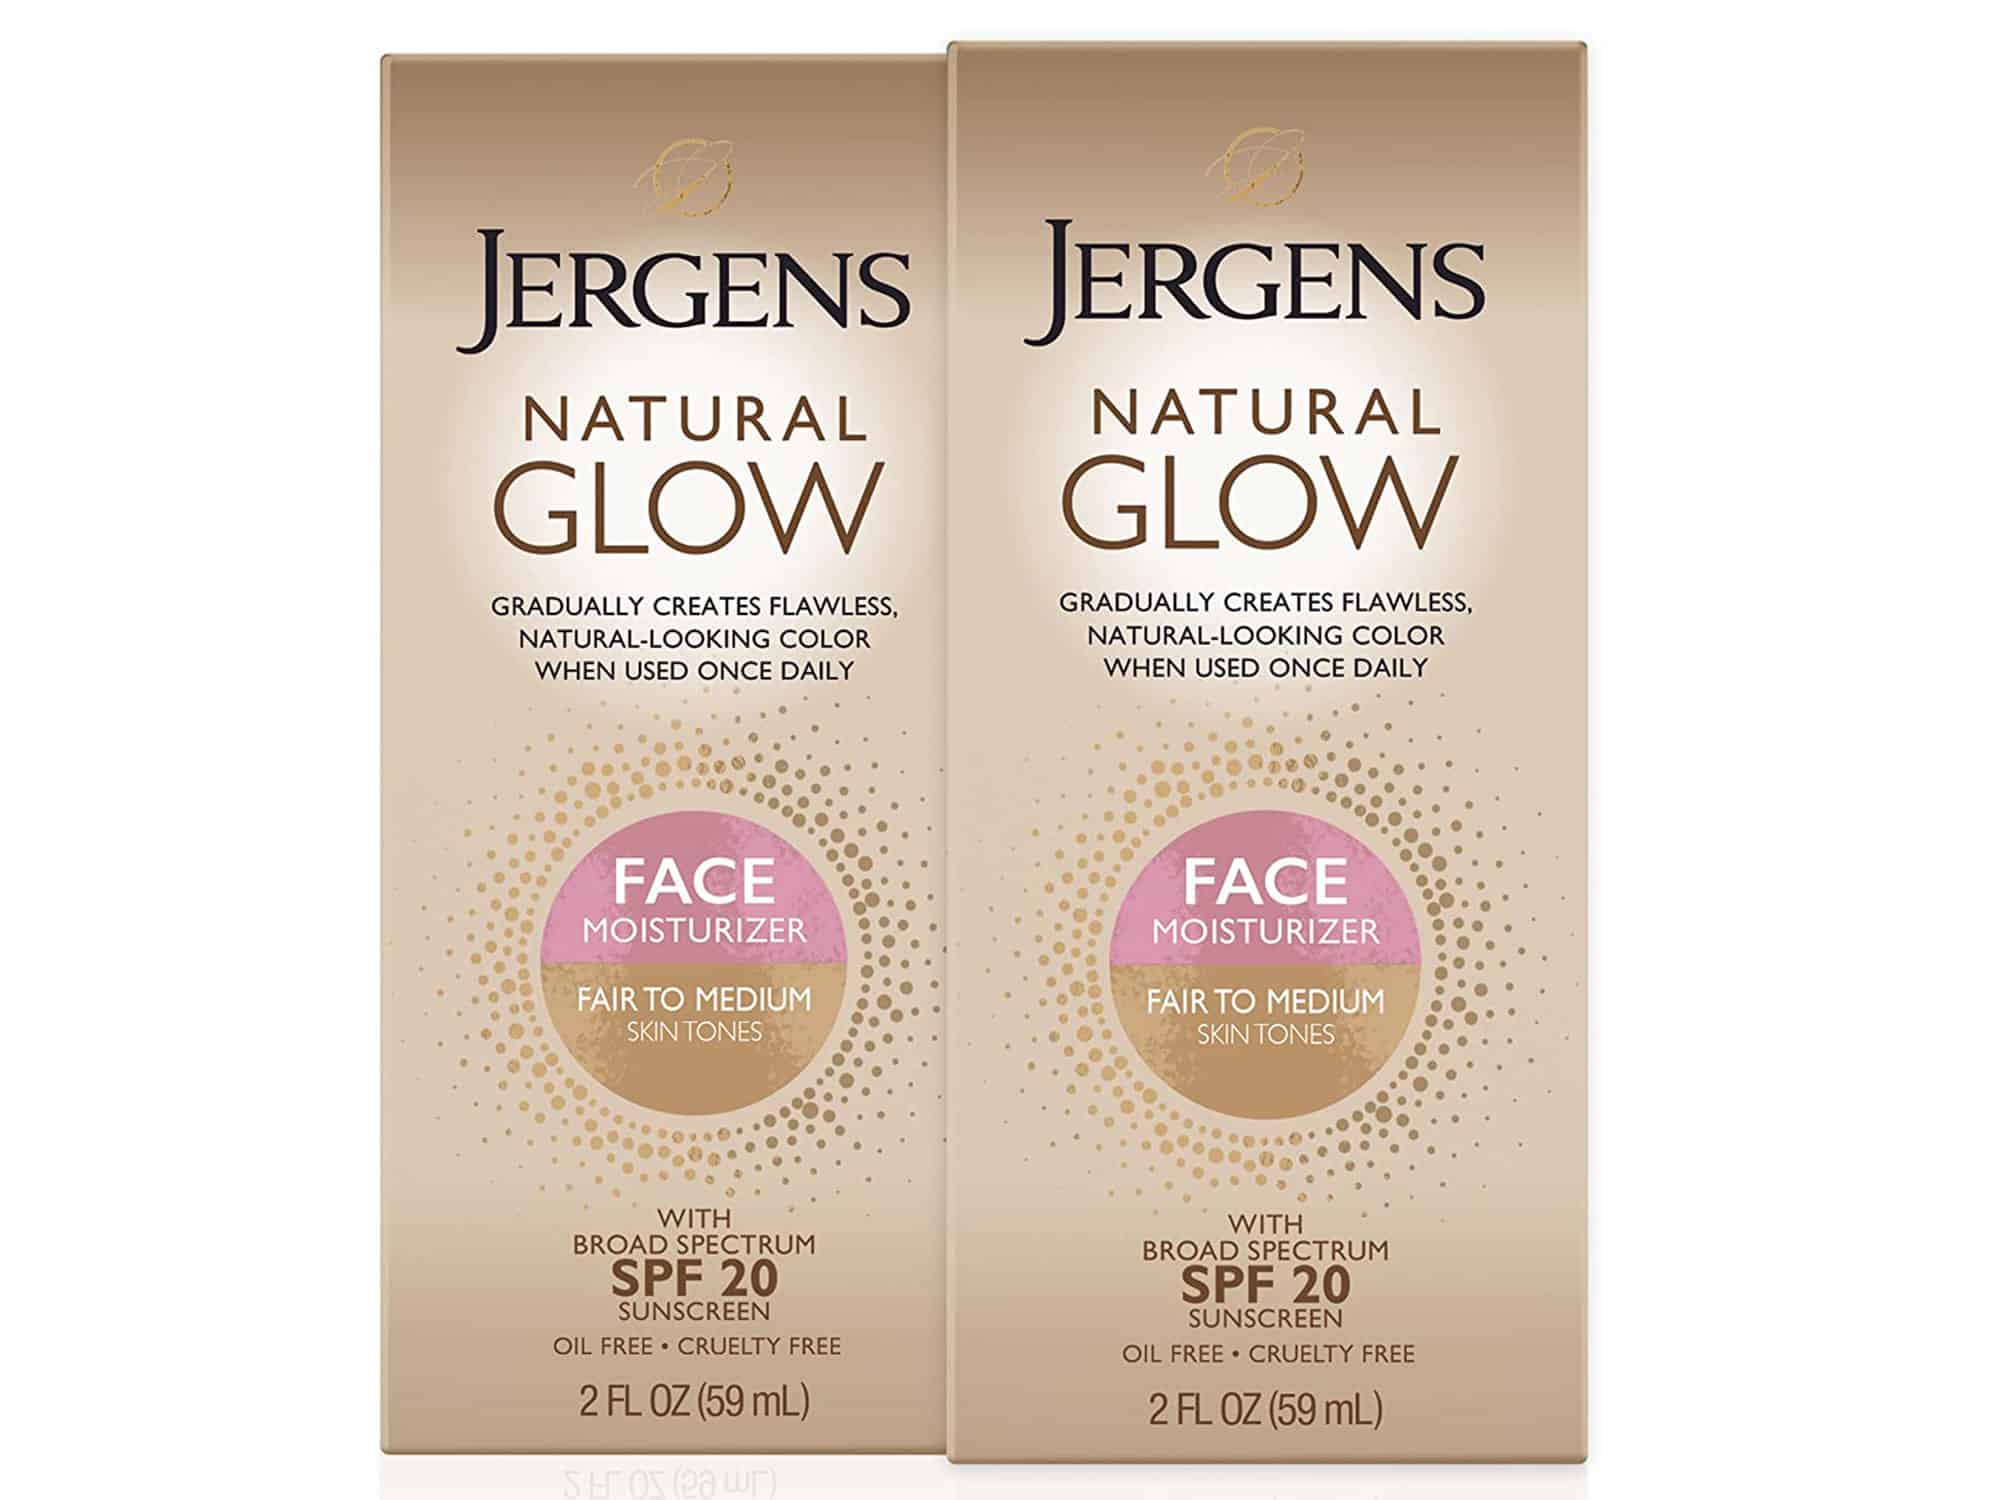 Jergens Natural Glow Self Tanner Face Moisturizer, Fair to Medium Skin Tone, SPF 20 Sunless Tanning, Daily Facial Sunscreen, Oil Free, Broad Spectrum Protection, 2 oz, Pack of 2 (Packaging May Vary)